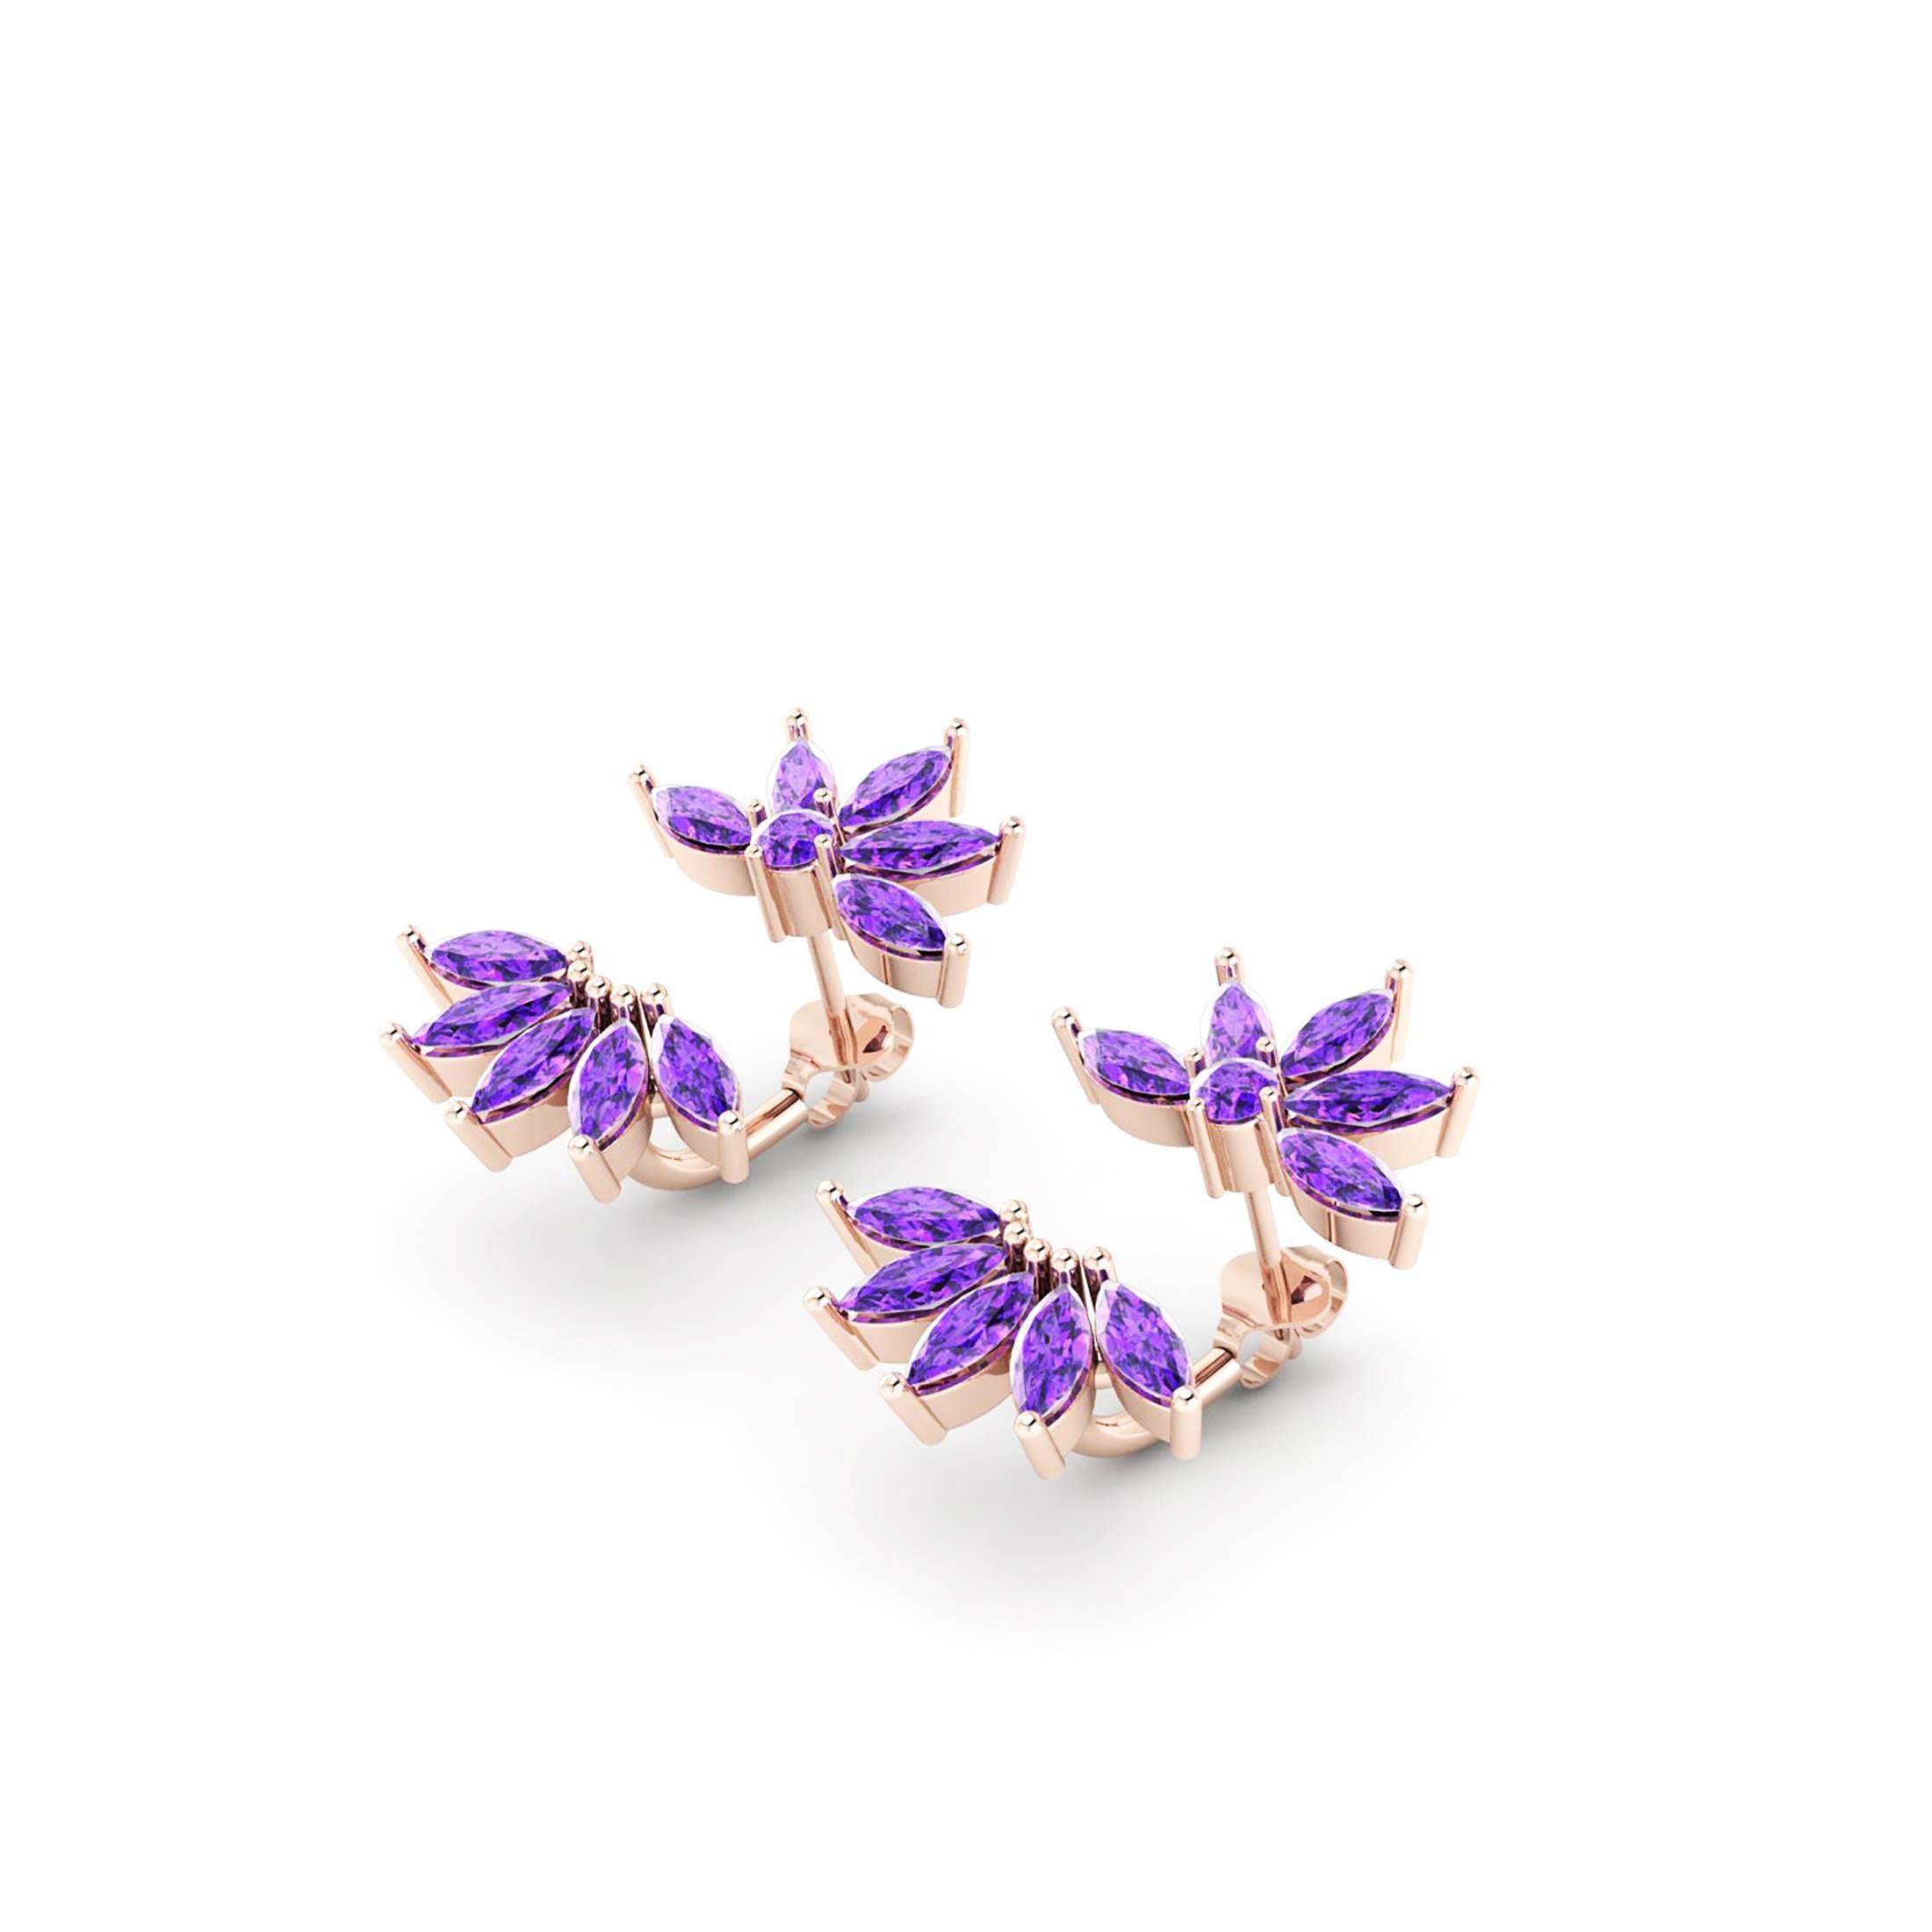 Ferrucci Marquise shape cut Amethyst modern earrings, made in 18k rose gold by Italian master jeweler Francesco Ferrucci in New York City,

Exquisite combination of a classic style with a modern wear for a distinguished younger style.

